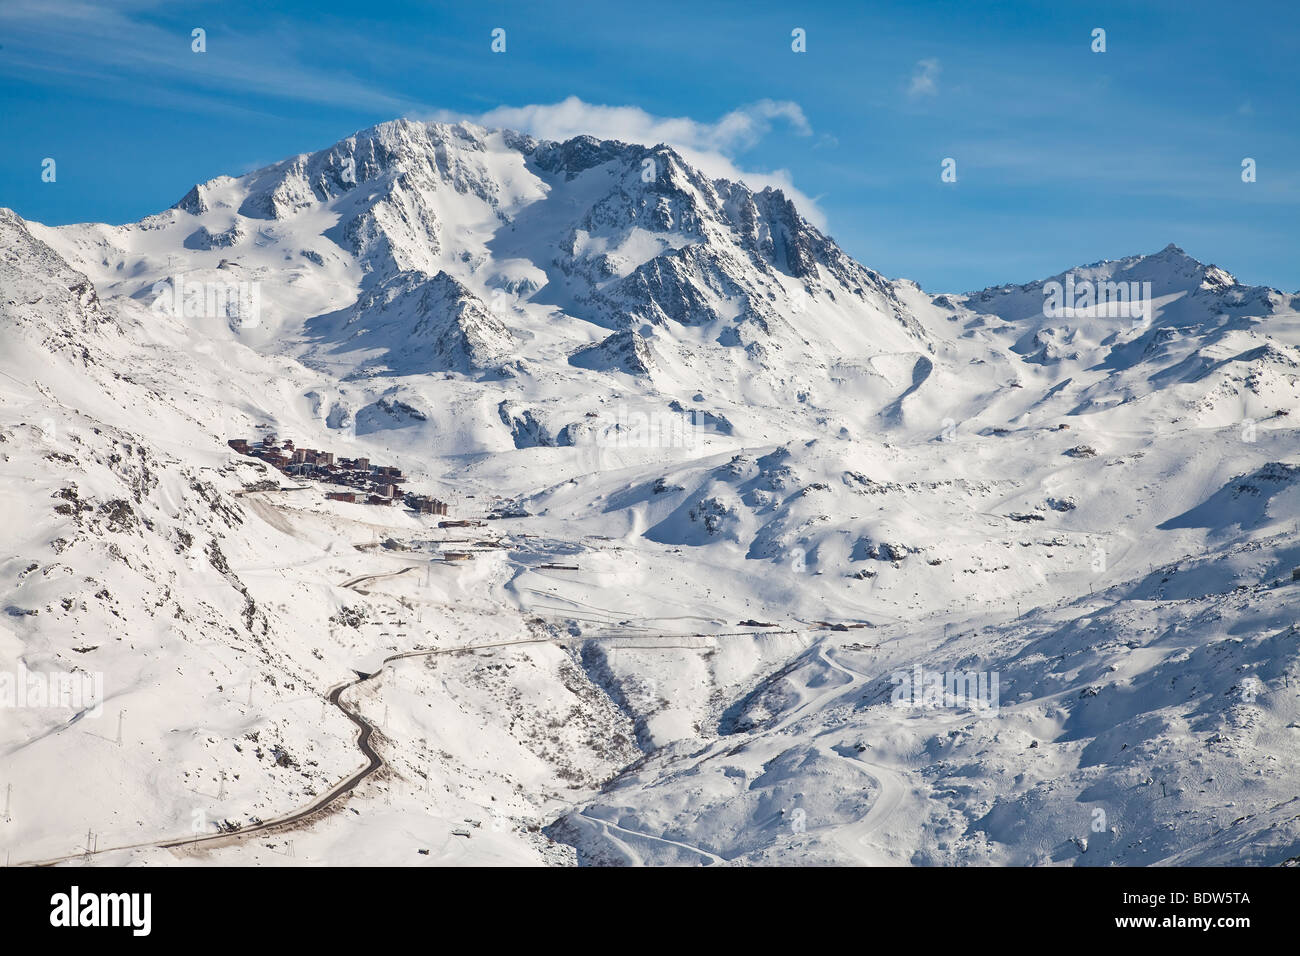 Val Thorens ski resort (2300m) in the Three Valleys, Les Trois Vallees, Savoie, French Alps, France Stock Photo